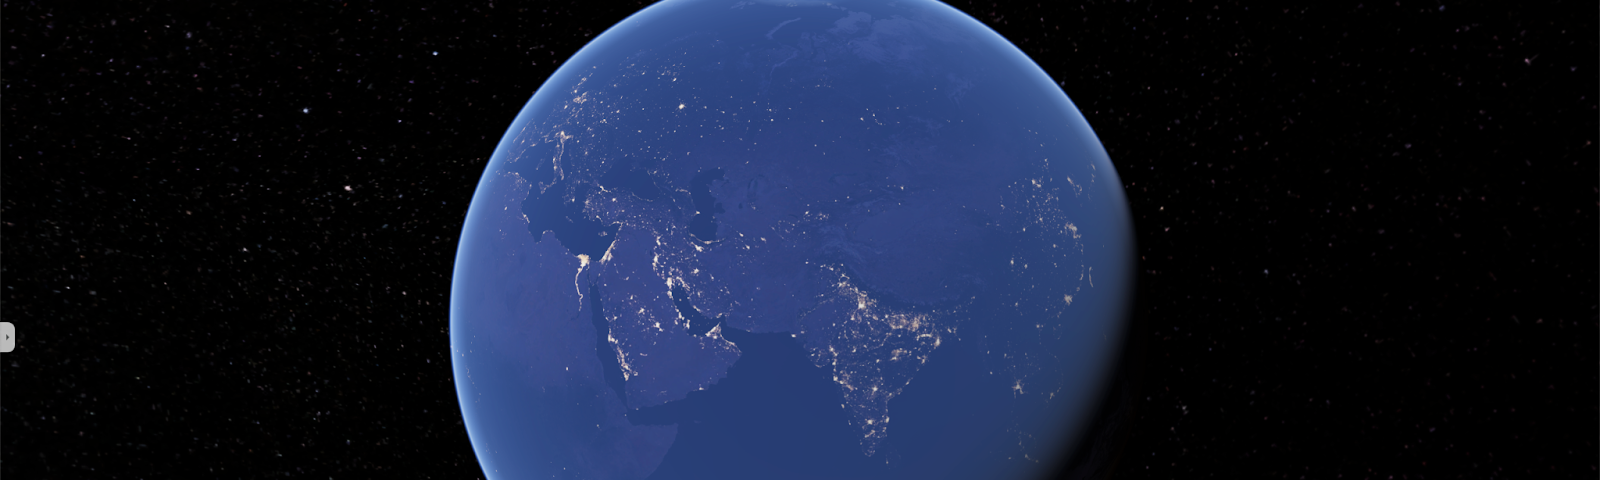 An example of a tile overlay in Google Earth showing NASA’s Black Marble (night lights) imagery.